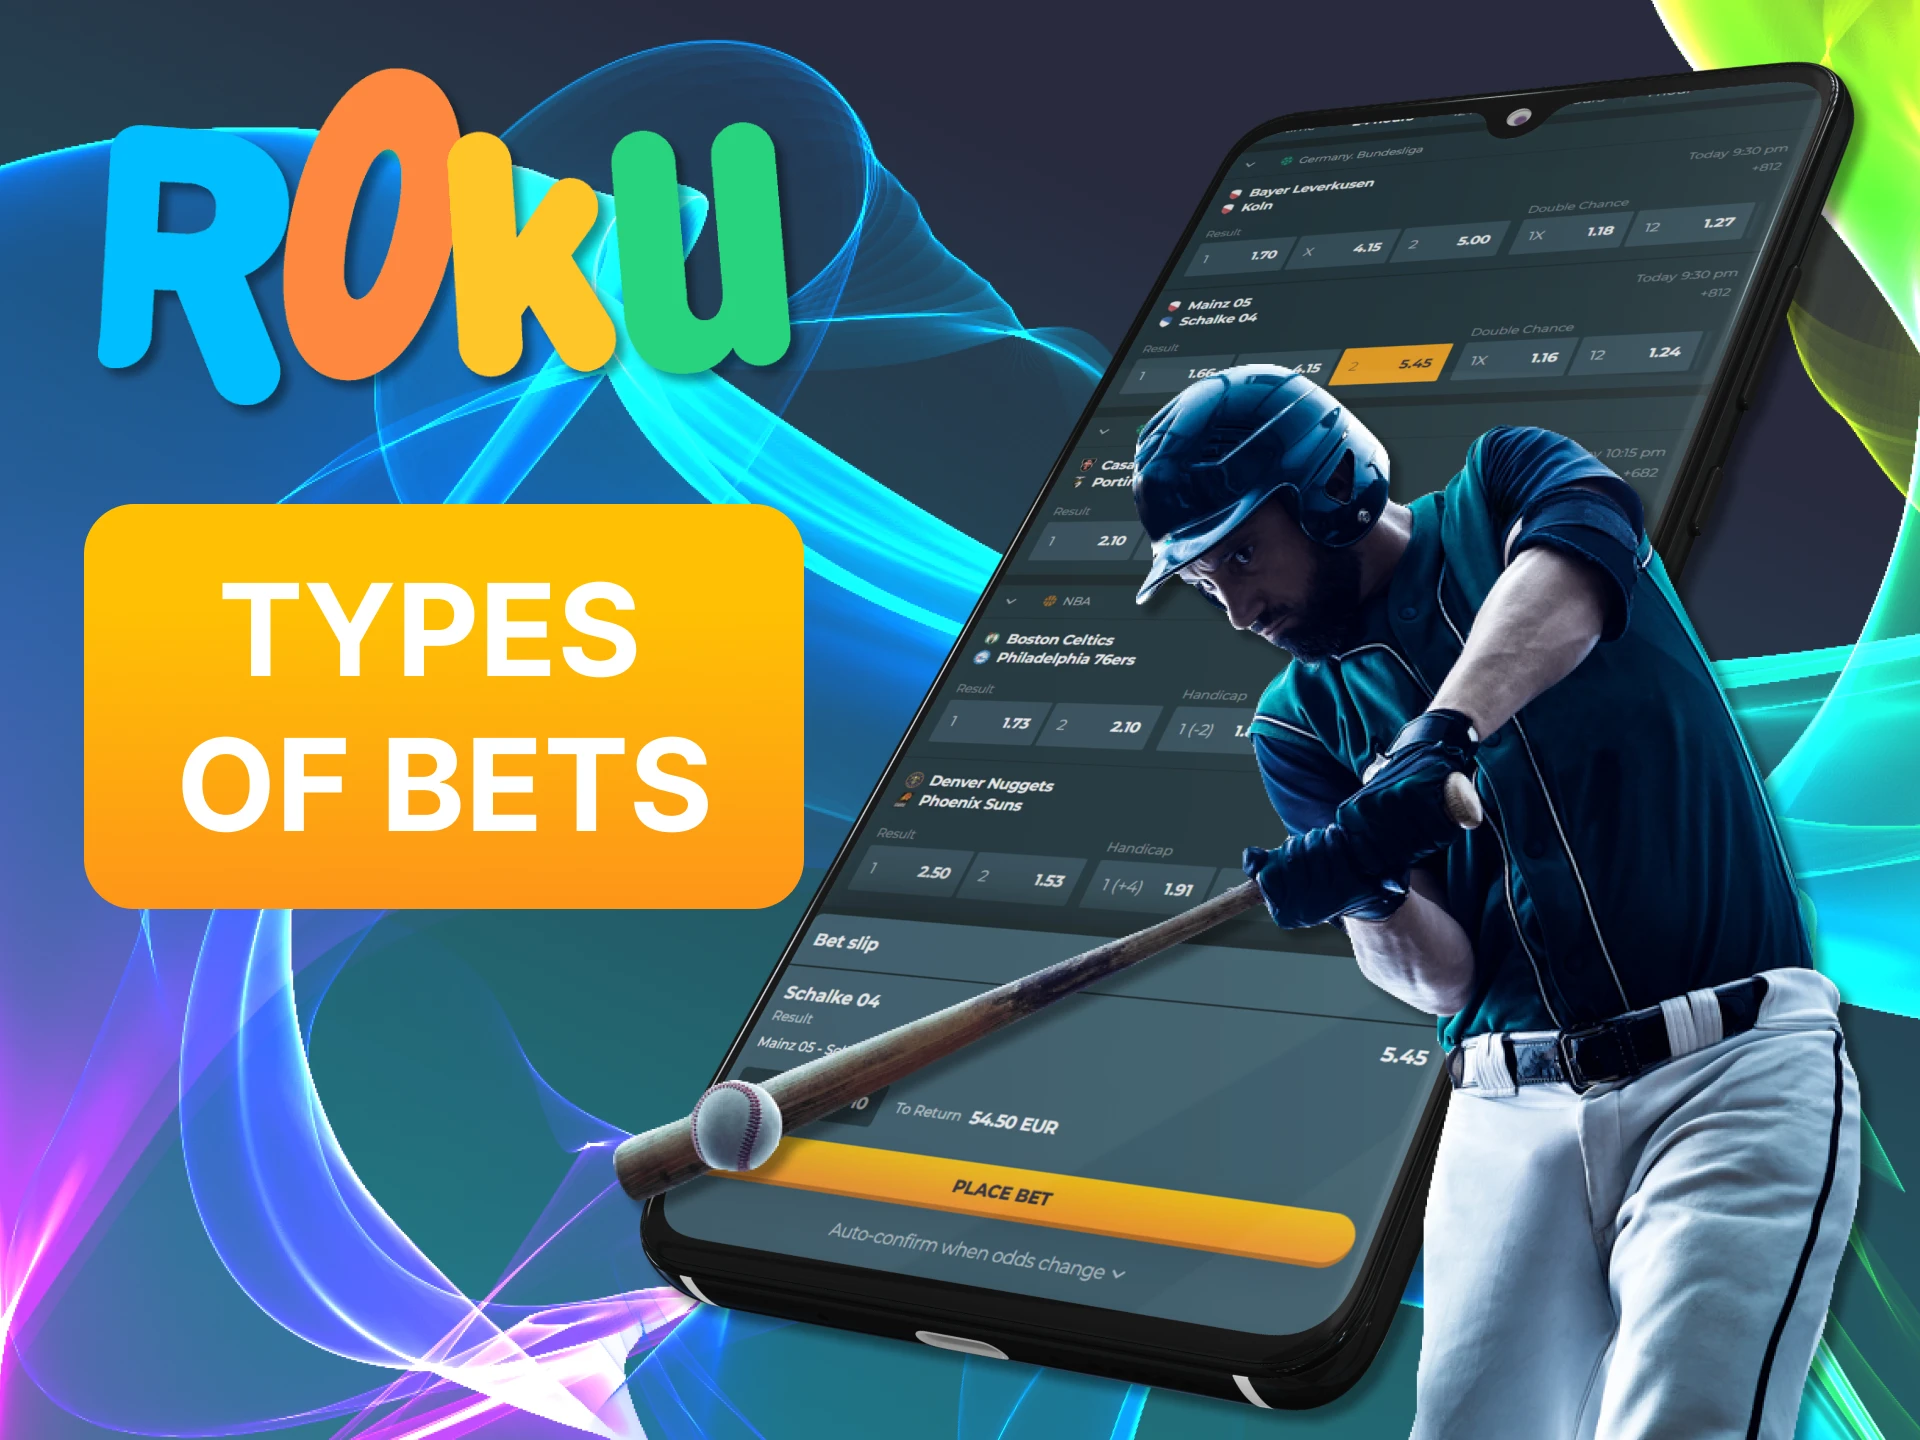 The Rokubet app gives you access to various types of bets on sporting events.